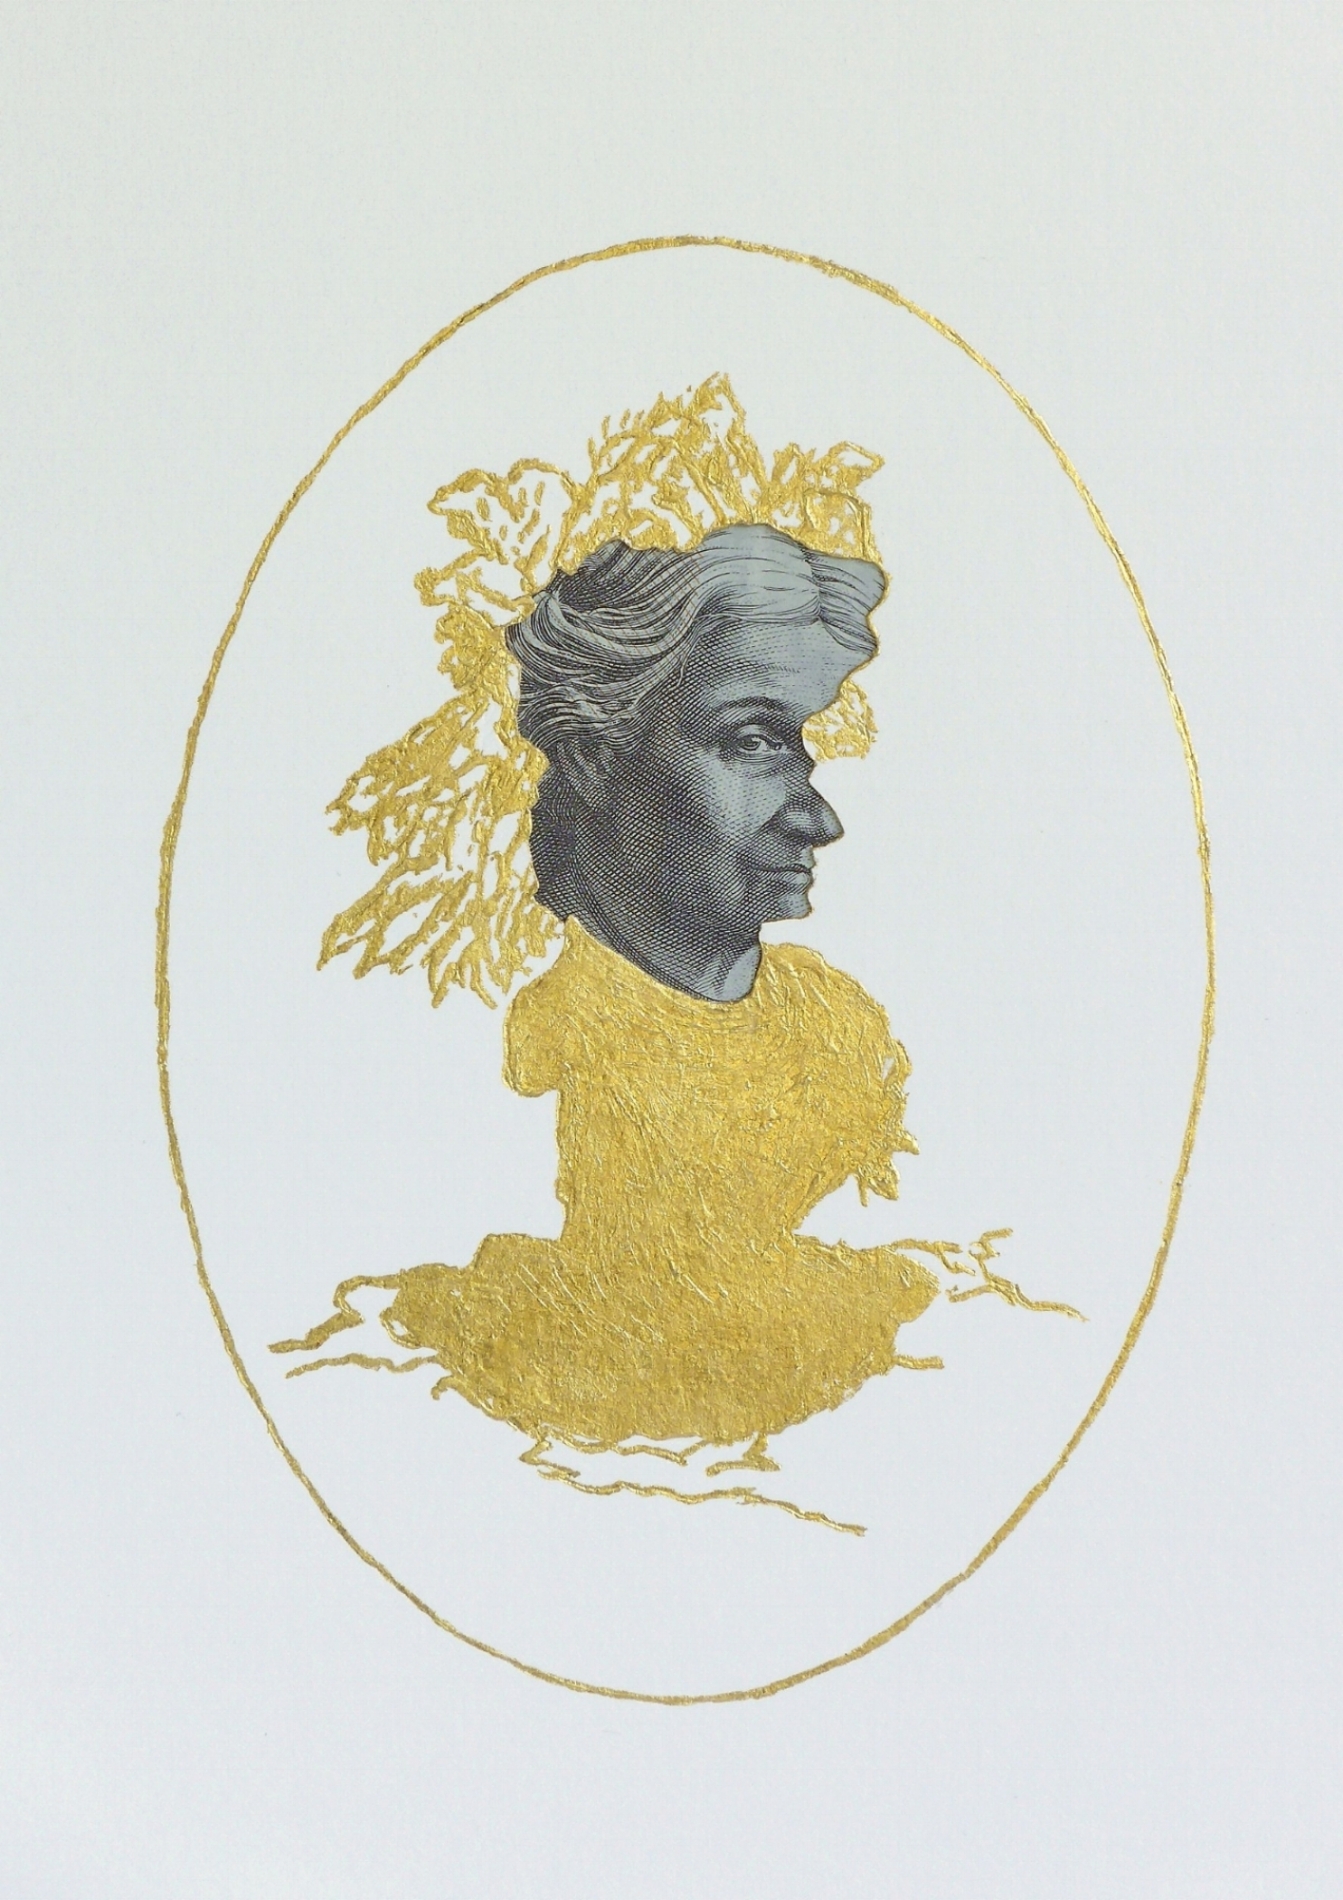   Myth of a Silhouette Portrait series , 2017, 50AUD and 24c gold leaf on hand-cut paper, 13 x 9.4 cm 